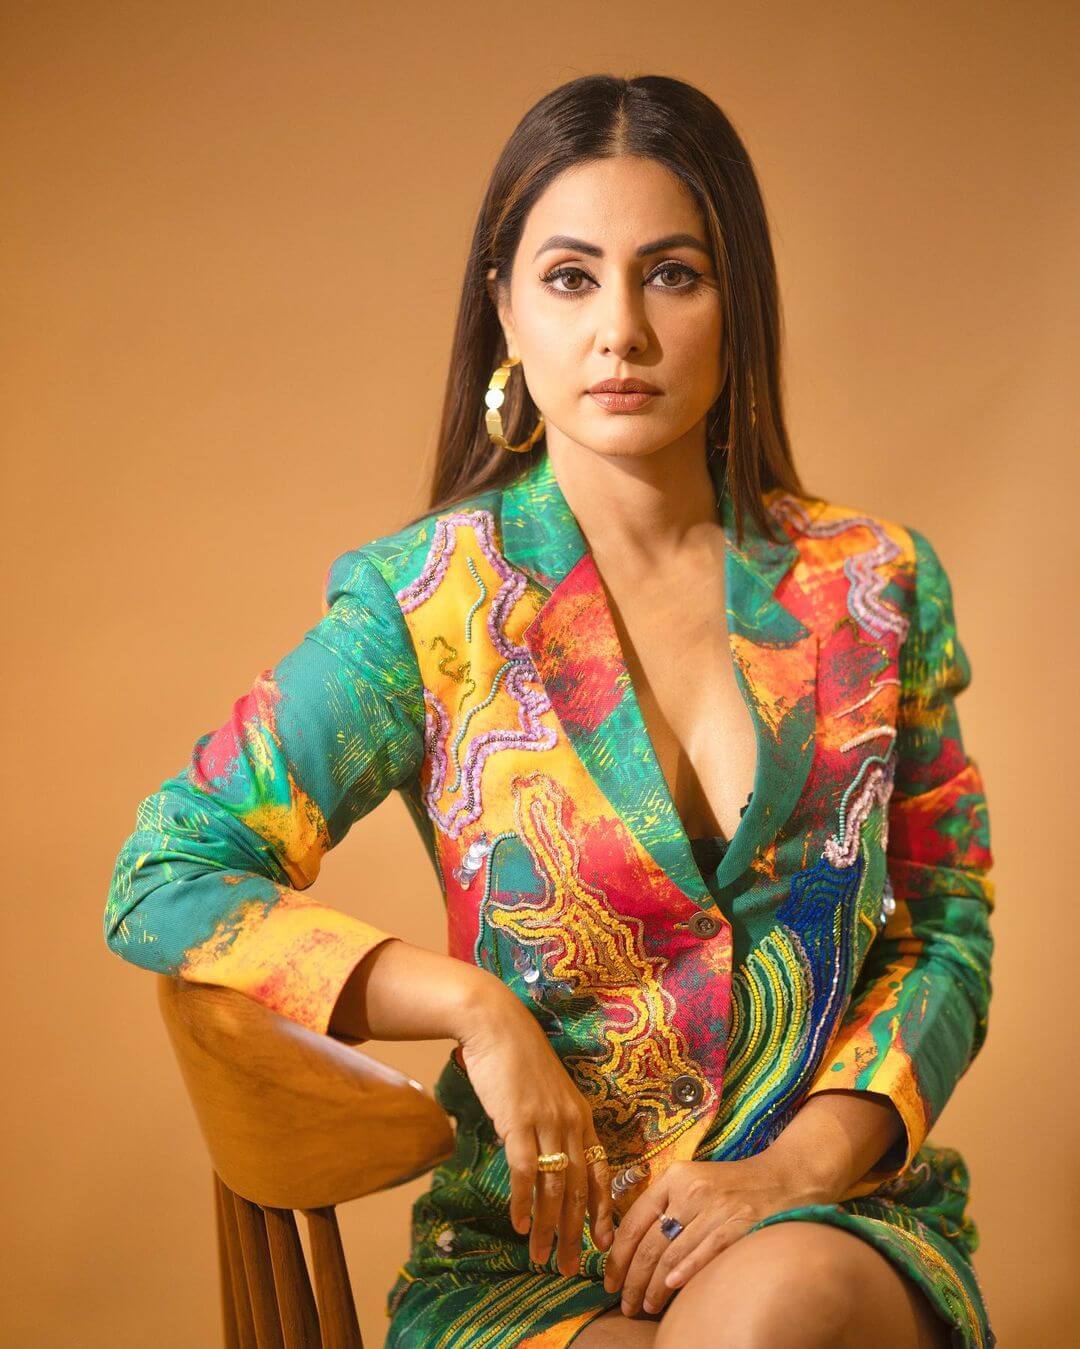 Hina Khan Goes Chic In Colorful Sequin Jacket Dress And Gold Hoops 846605